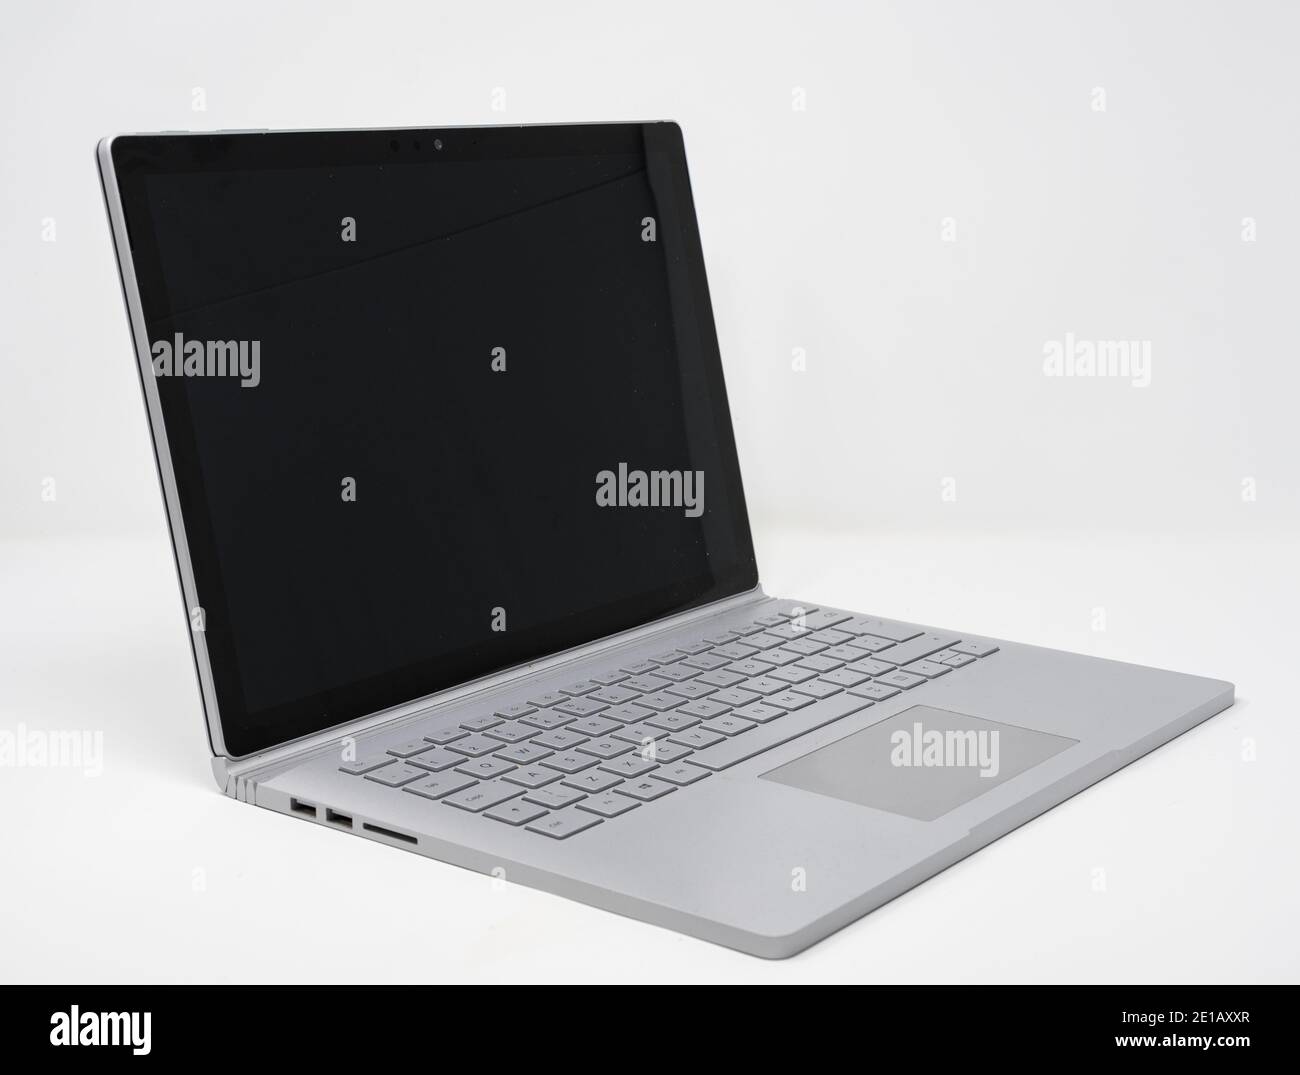 Reading, United Kingdom - December 20 2020:  A Microsoft surface laptop 2 computer Stock Photo